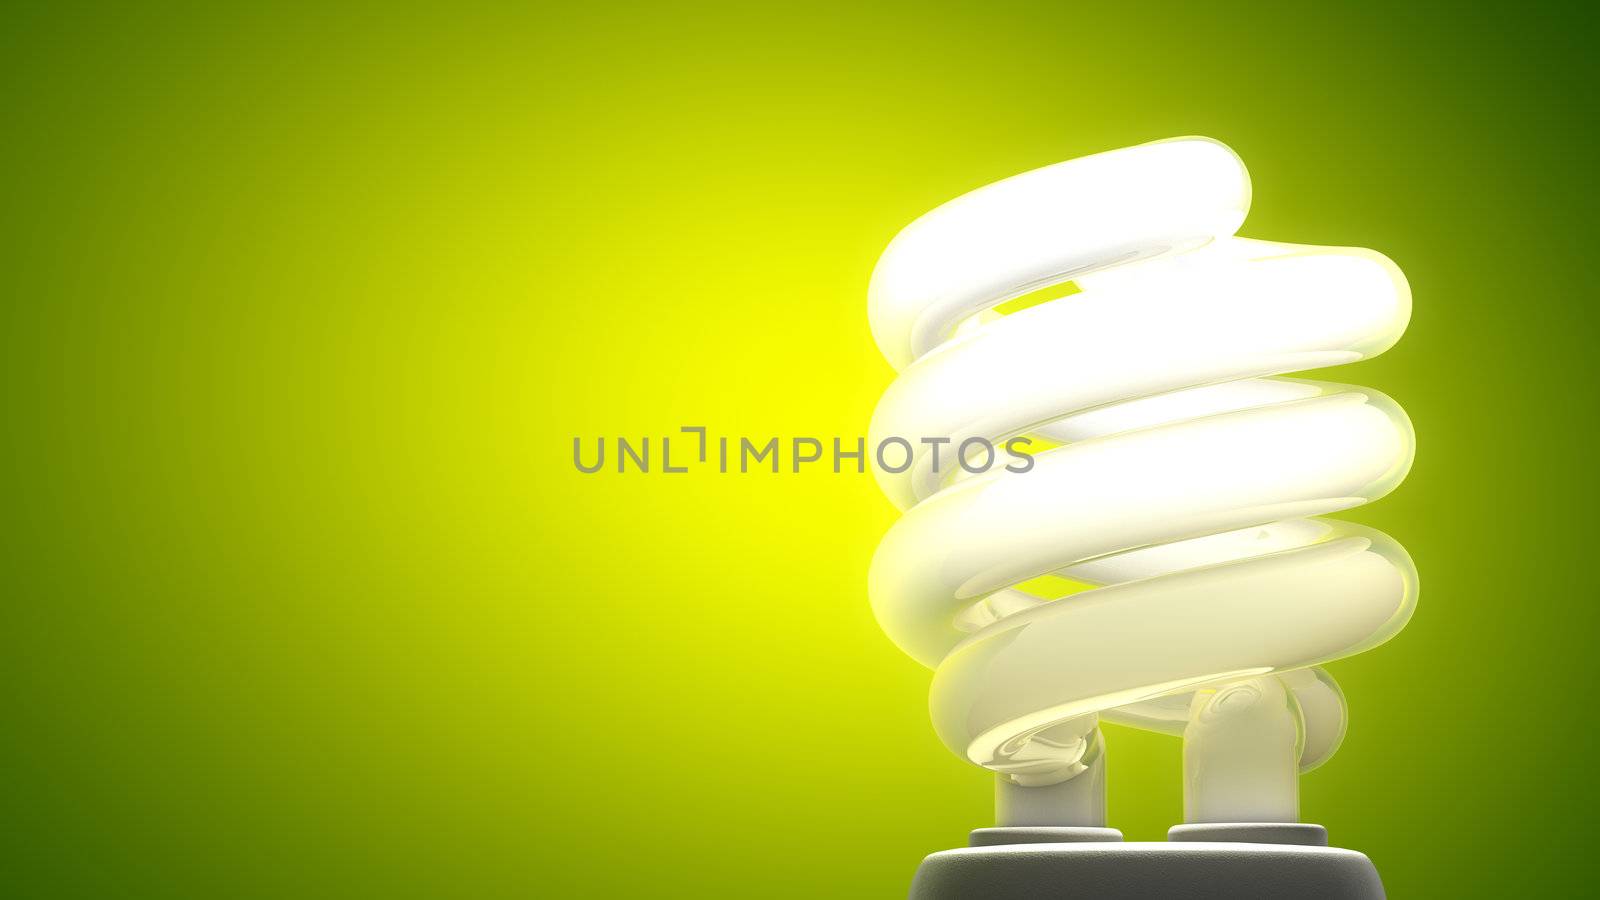 Compact fluorescent lamp. Green background, ecological metaphor.